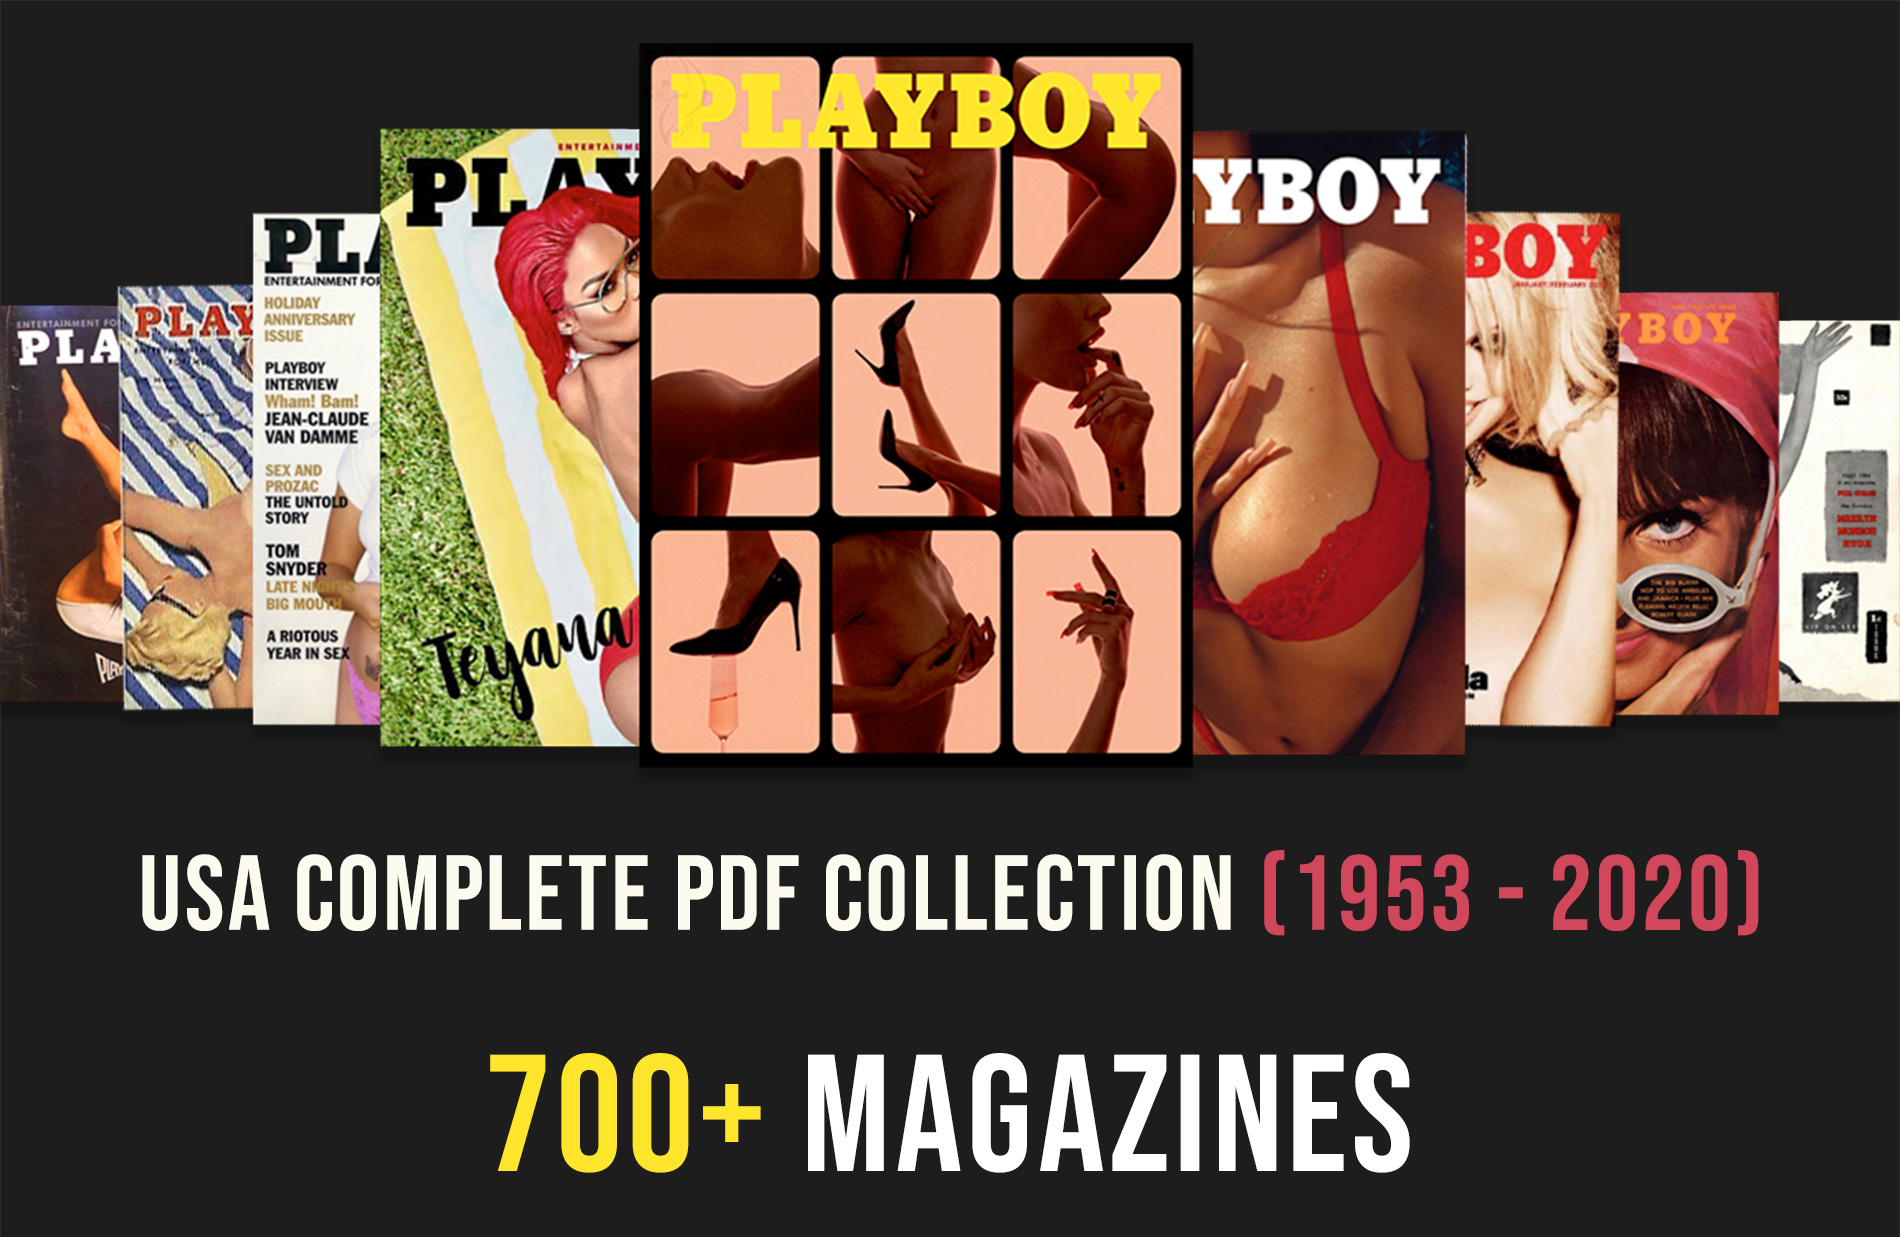 Playboy Finally Did It! , Download The Complete Playboy Digital Magazine Collection (1953 - 2020) 8